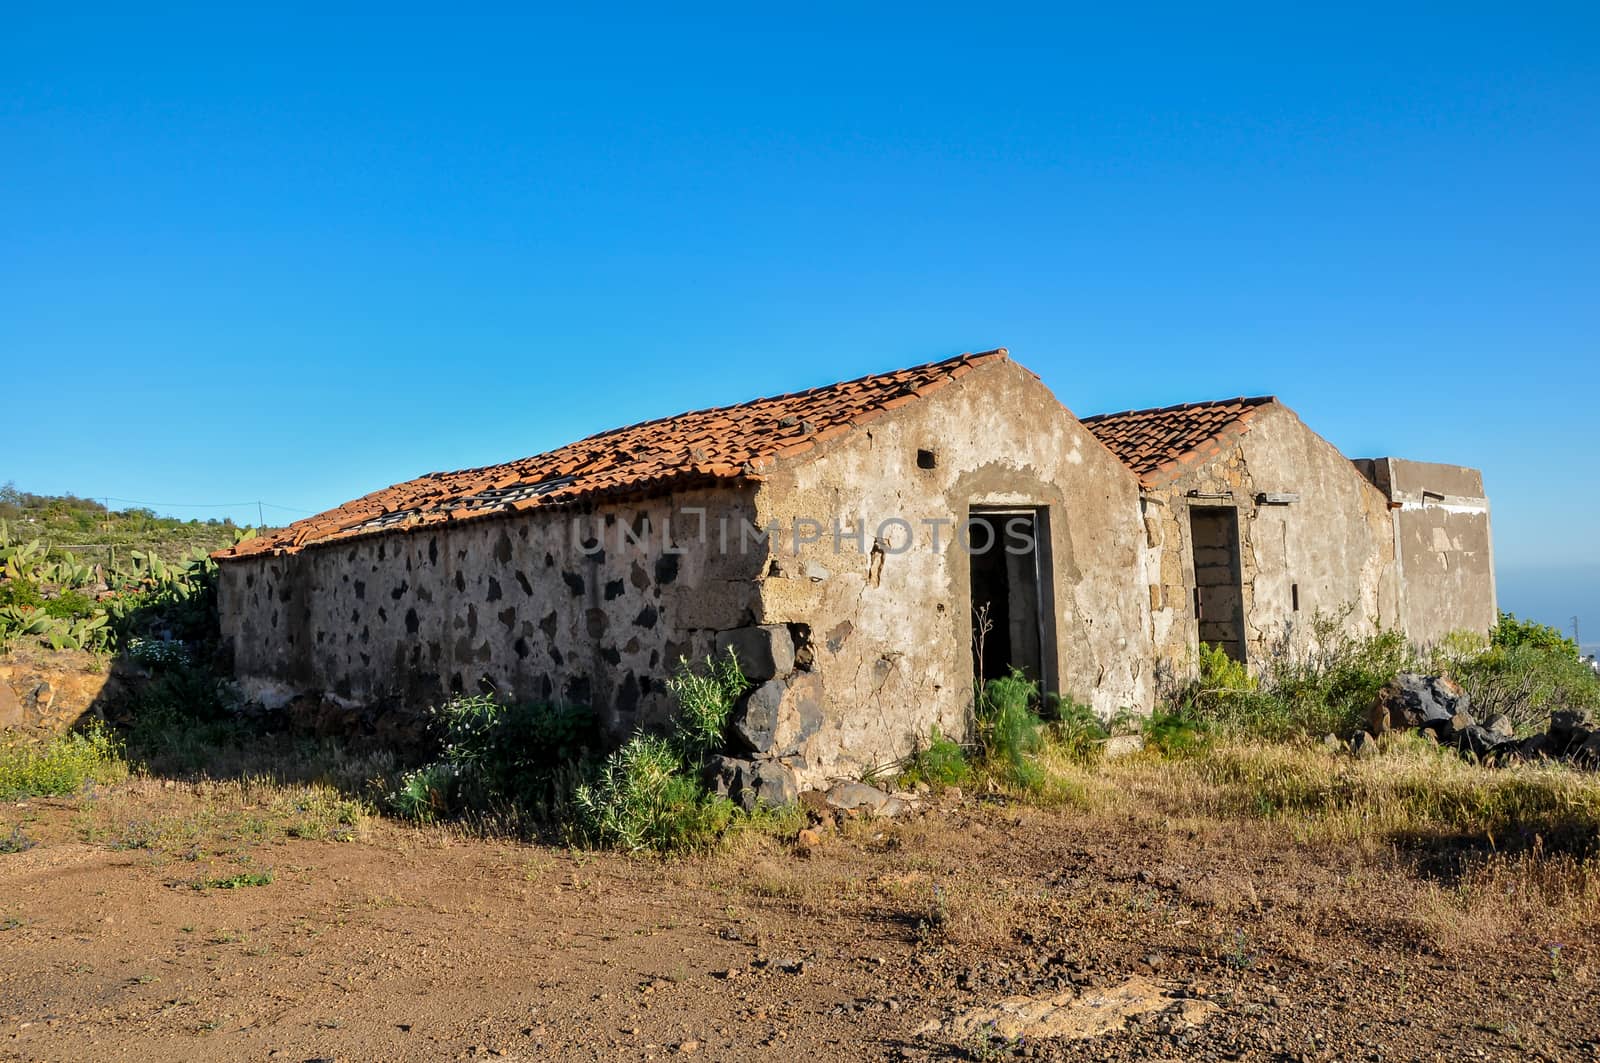 Abandoned Farmhouse On A Sunny Day In Tenerife